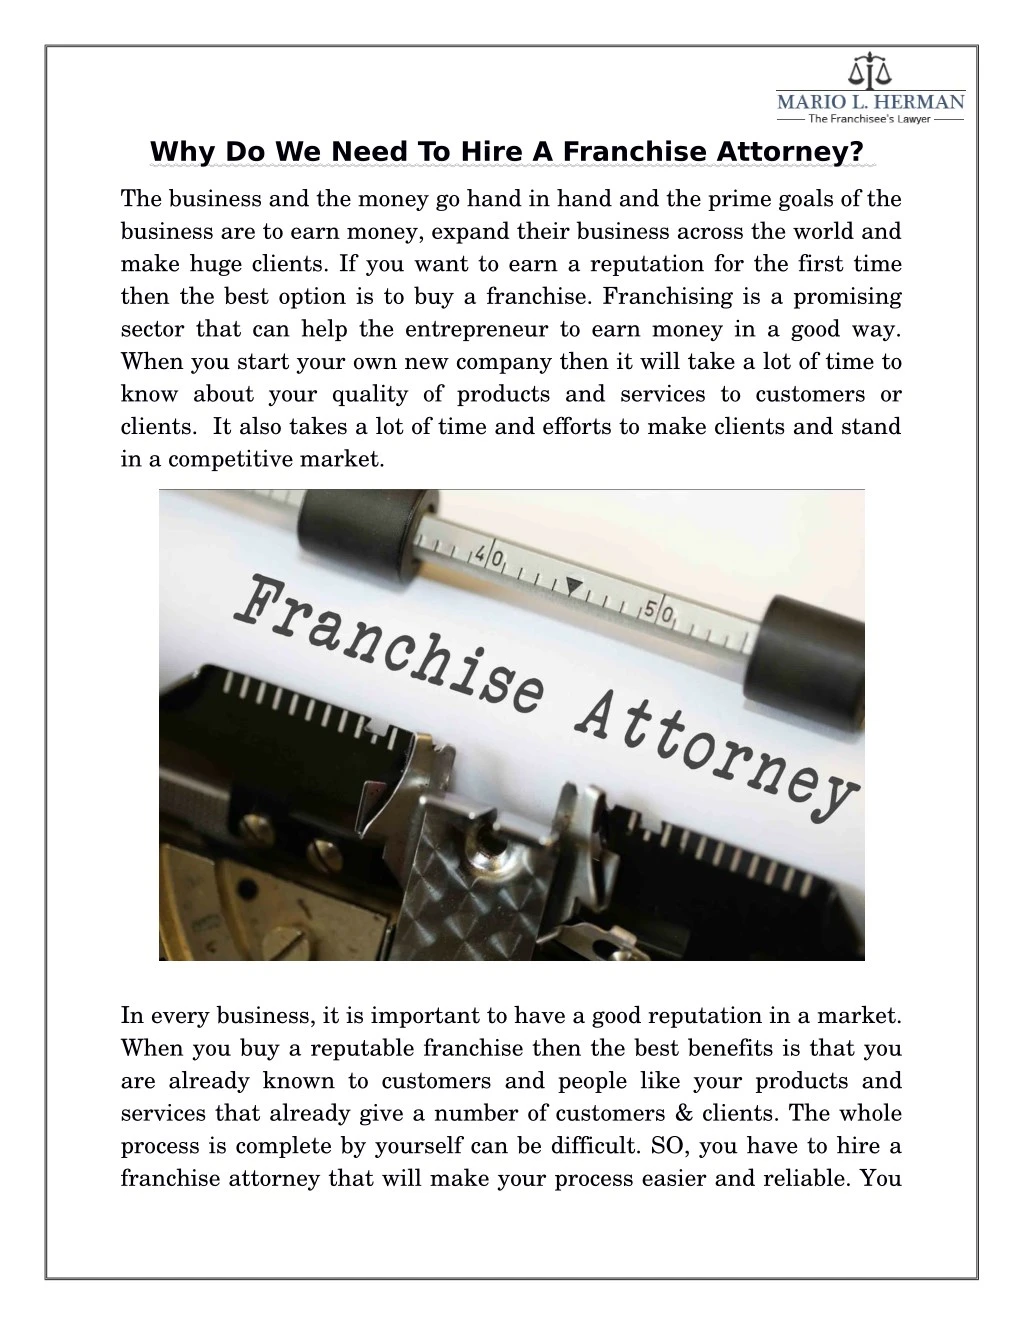 why do we need to hire a franchise attorney